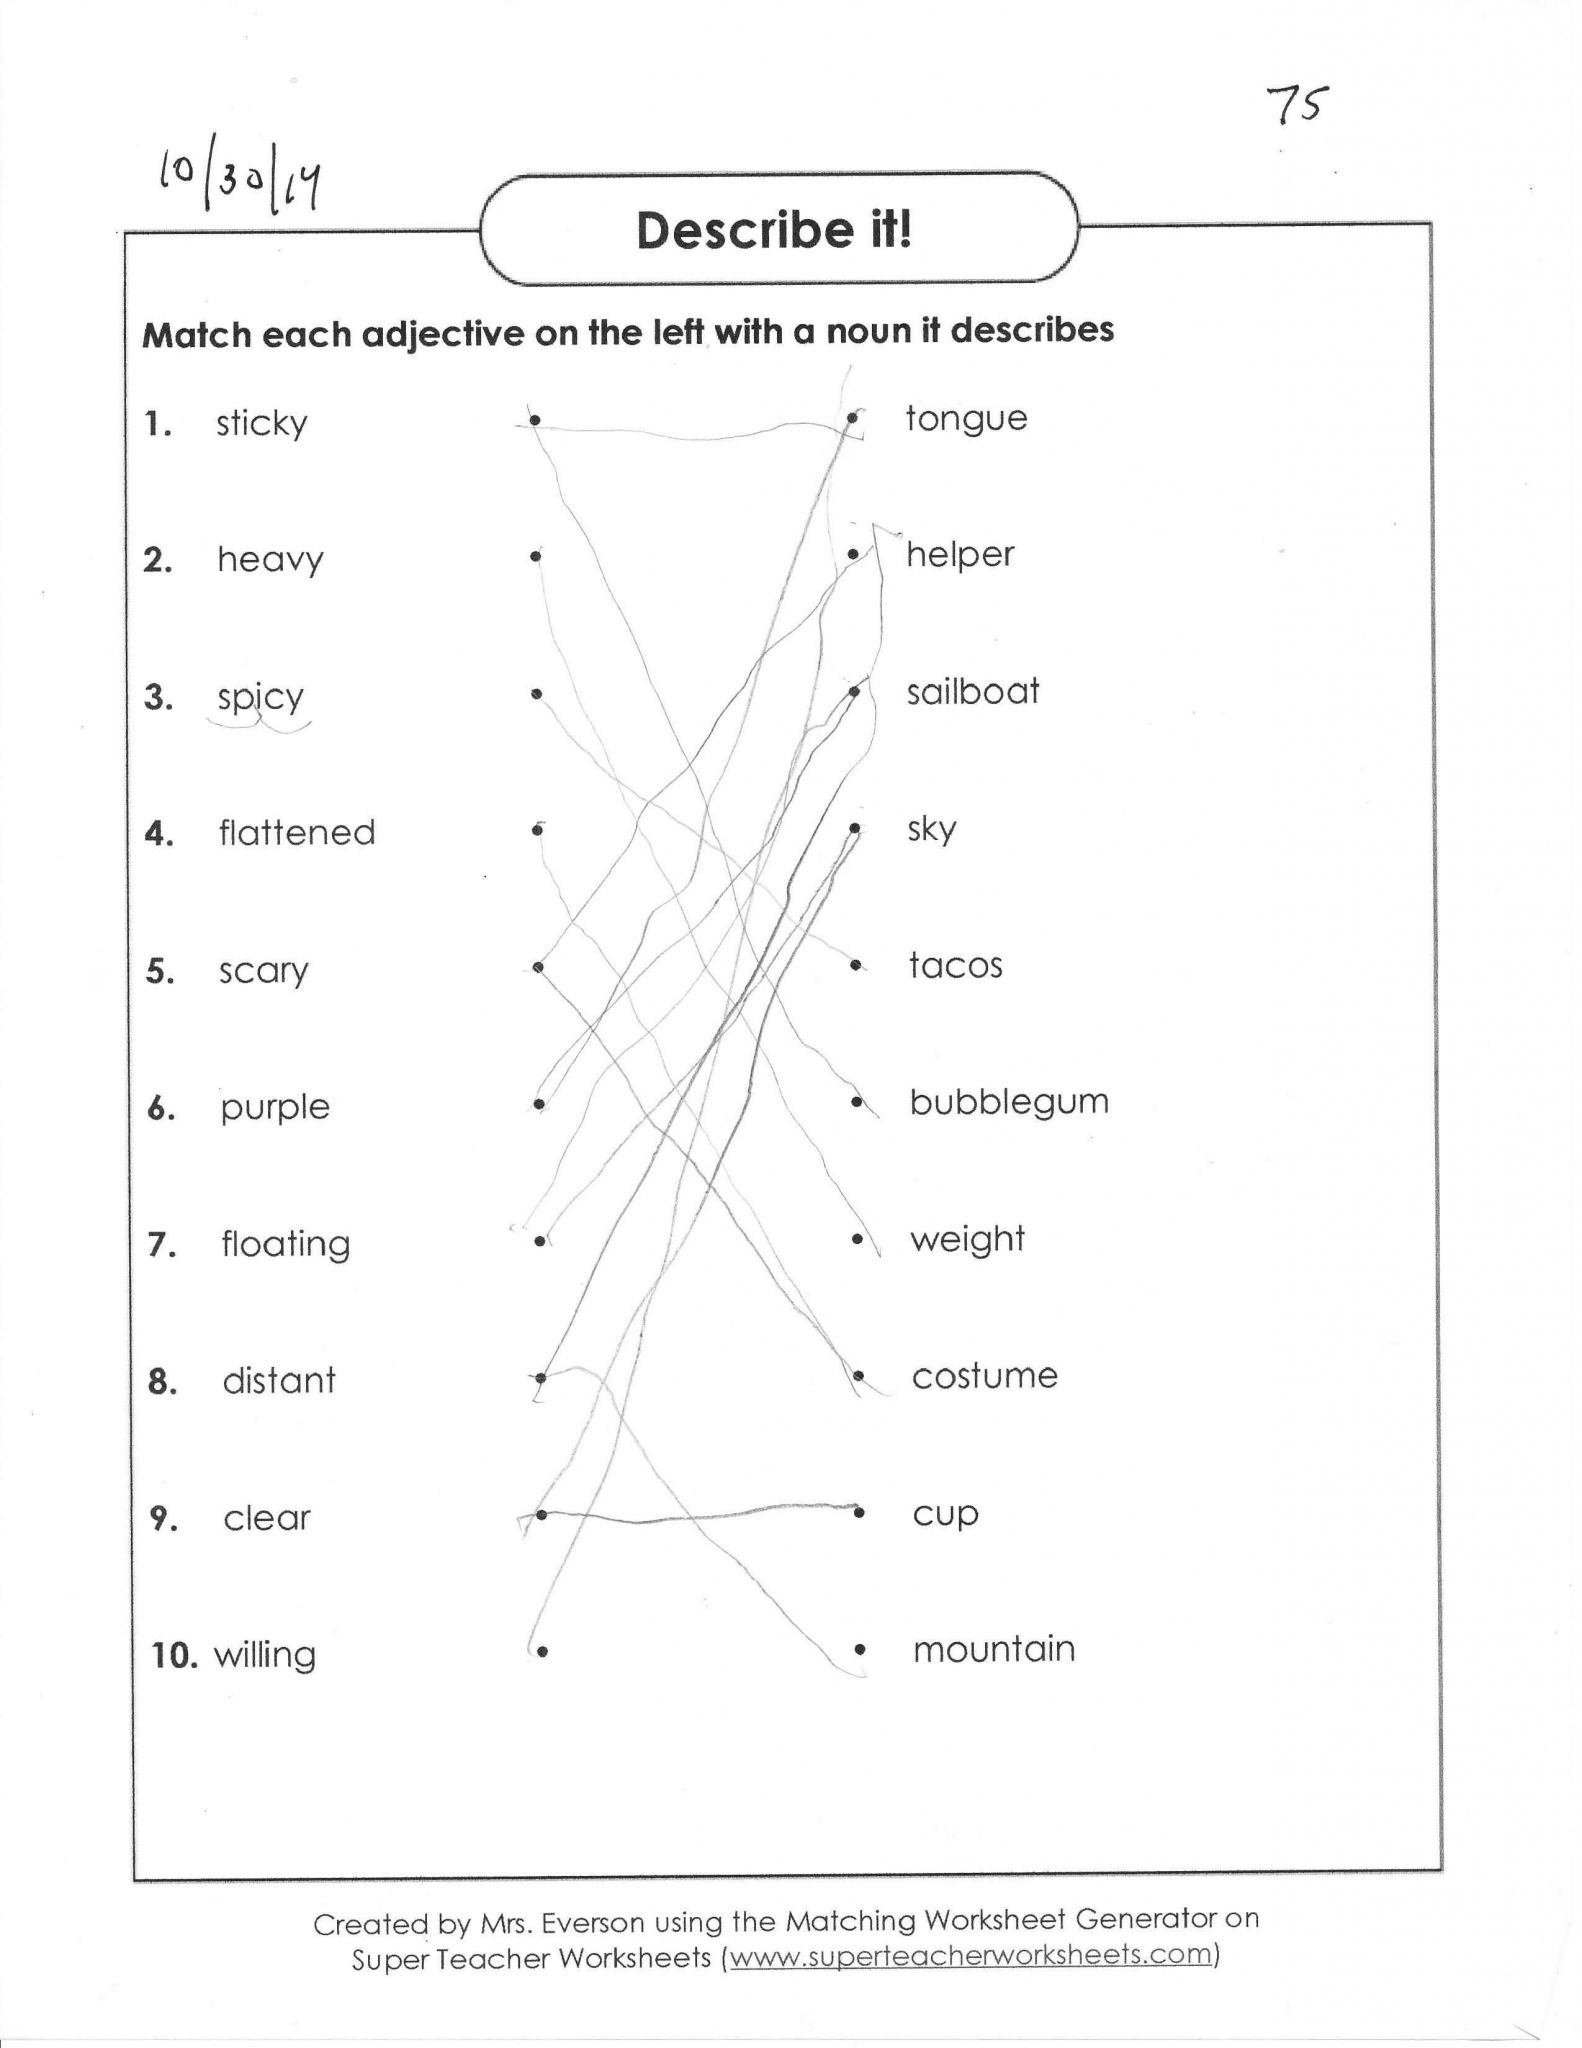 Grammar Punctuation Worksheets as Well as Super Teacher Worksheets Adjectives Best Printable Editing